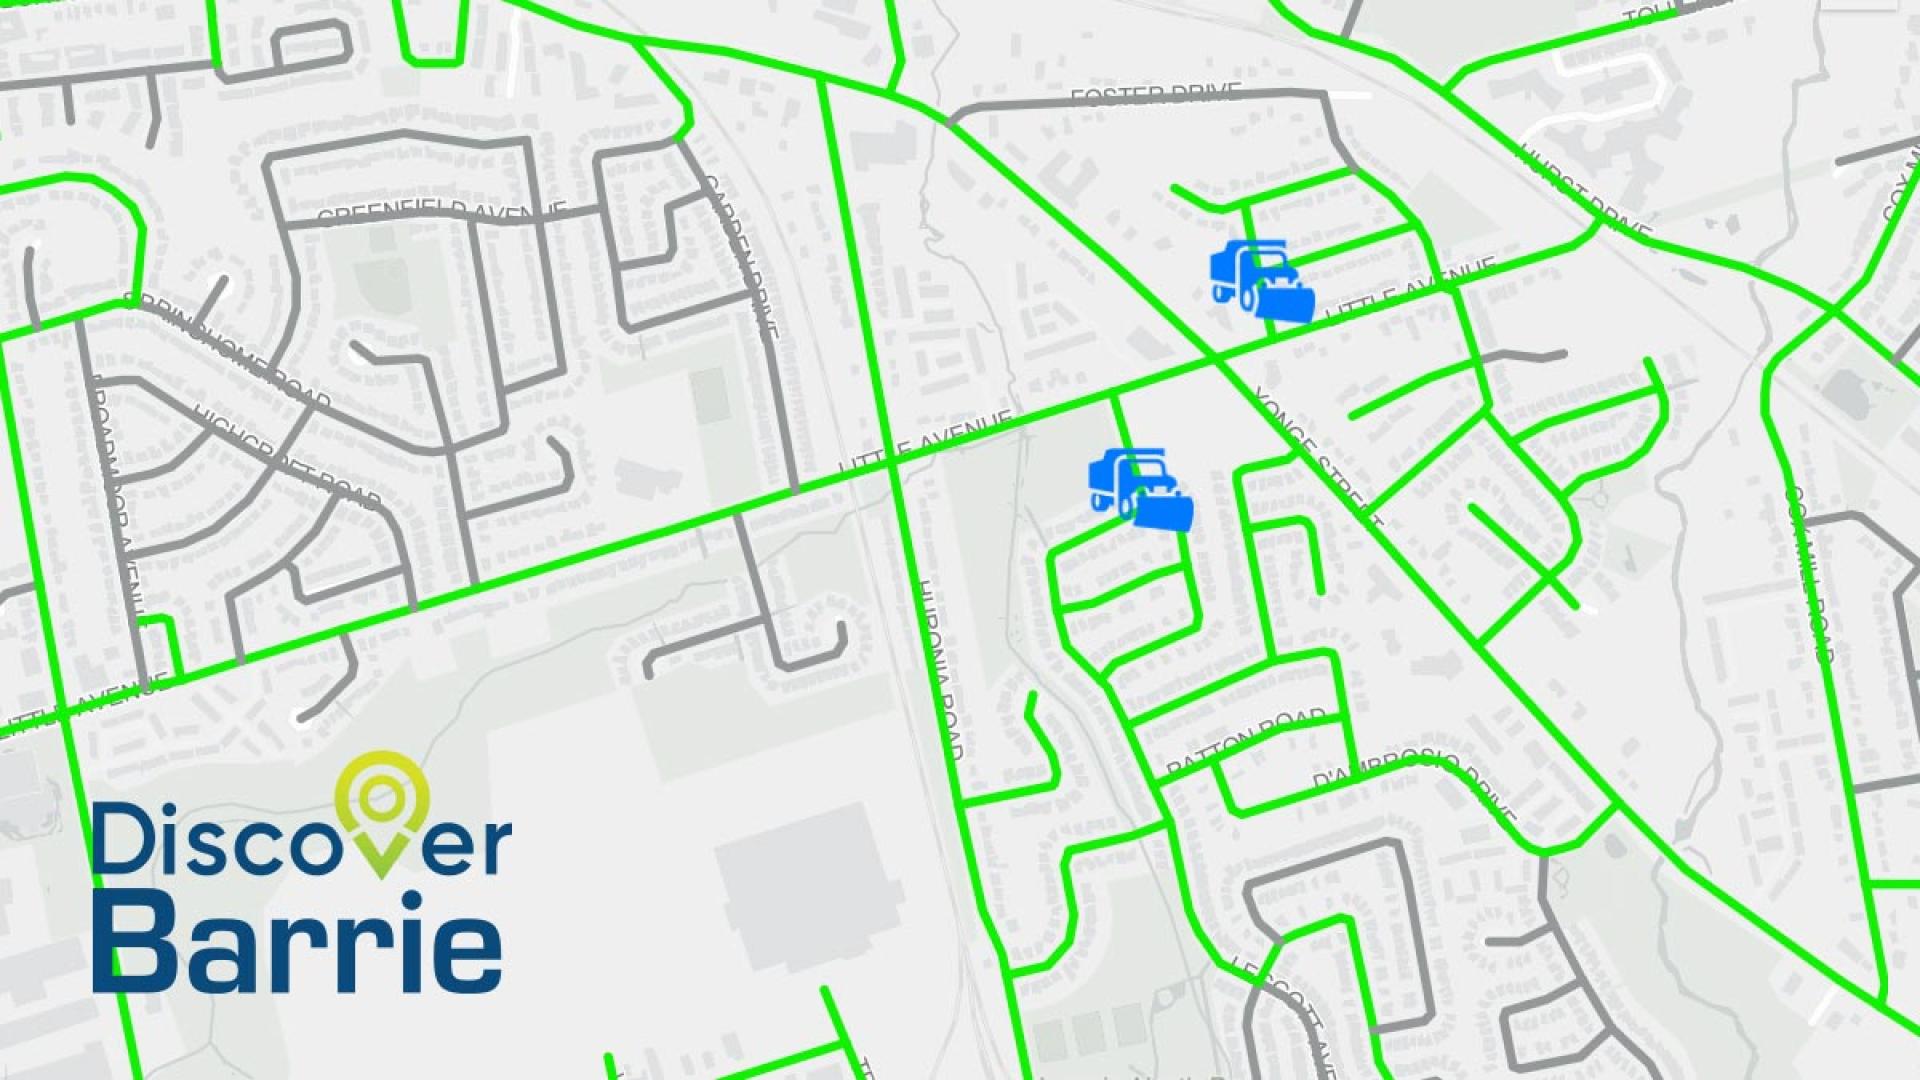 Discover Barrie logo over Plow Tracker map